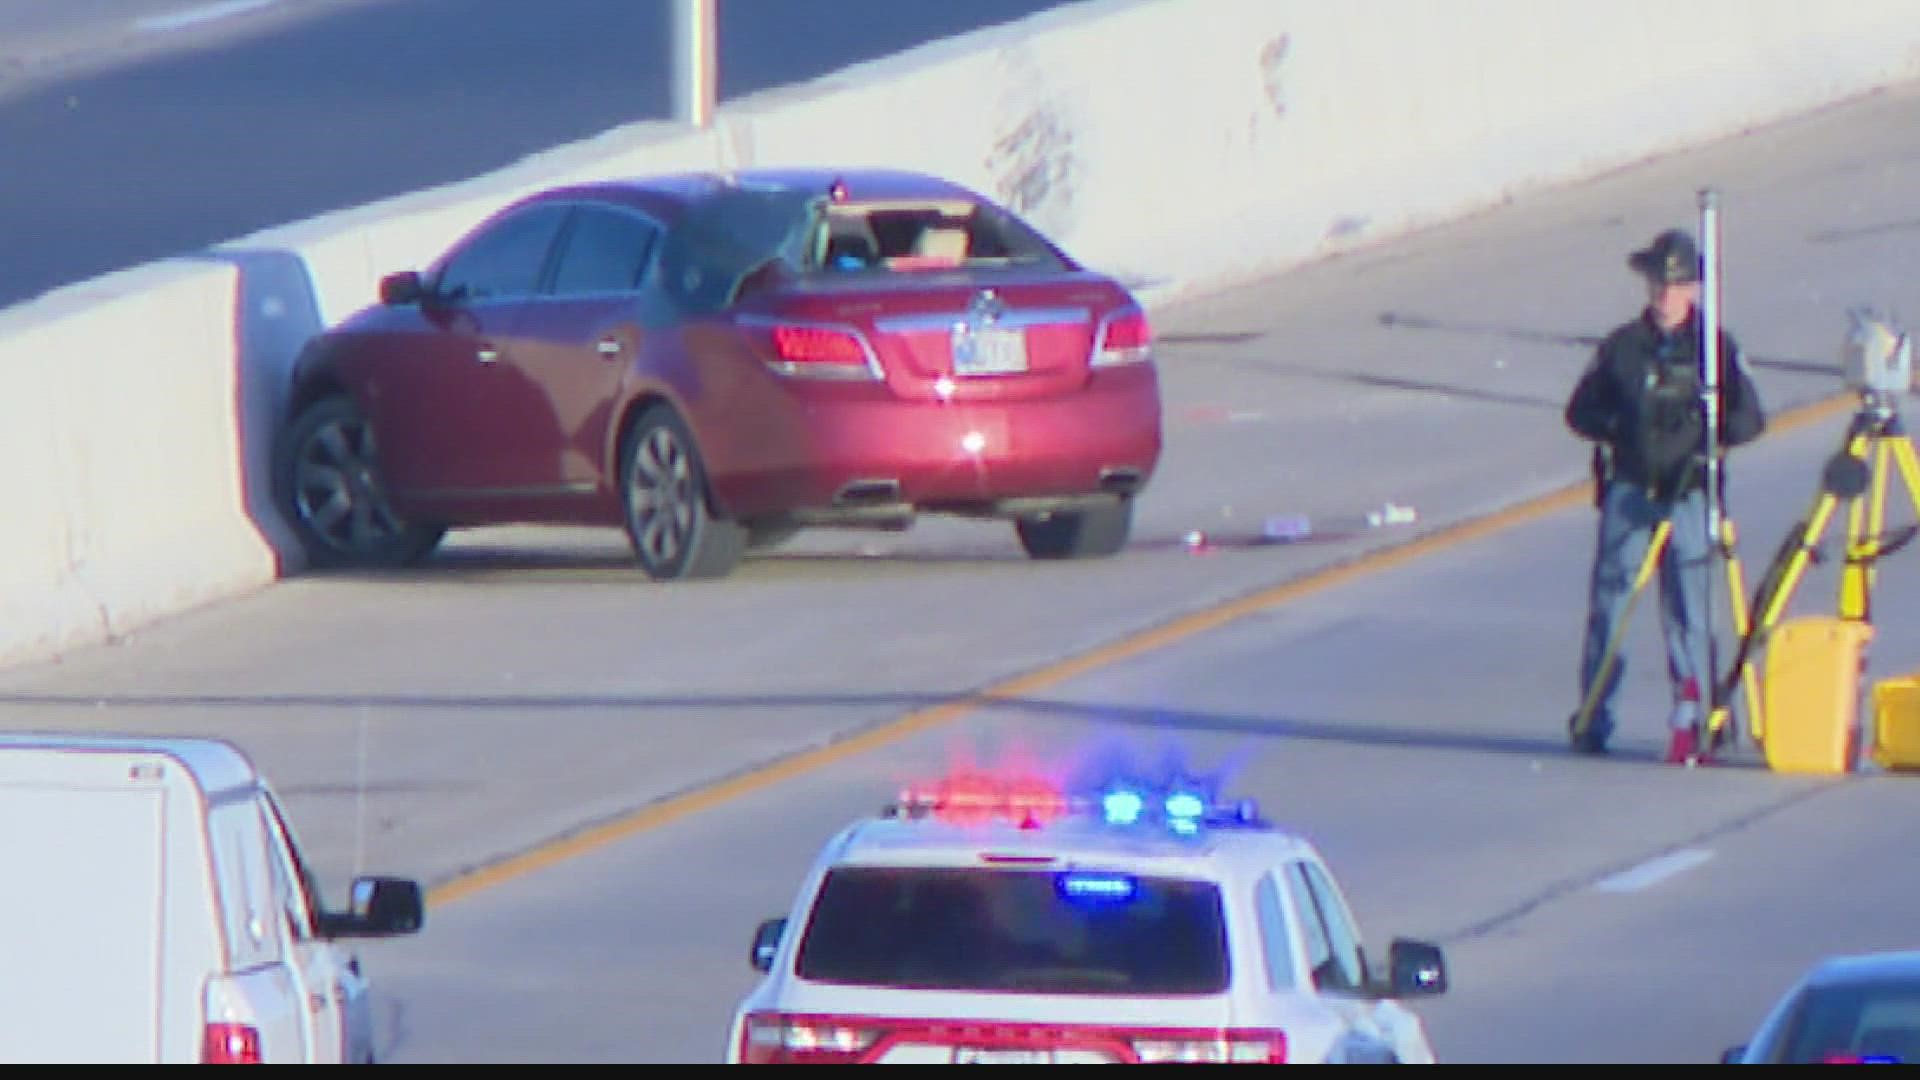 One person was killed during the incident that shut down northbound traffic on I-465 for six hours Monday morning.